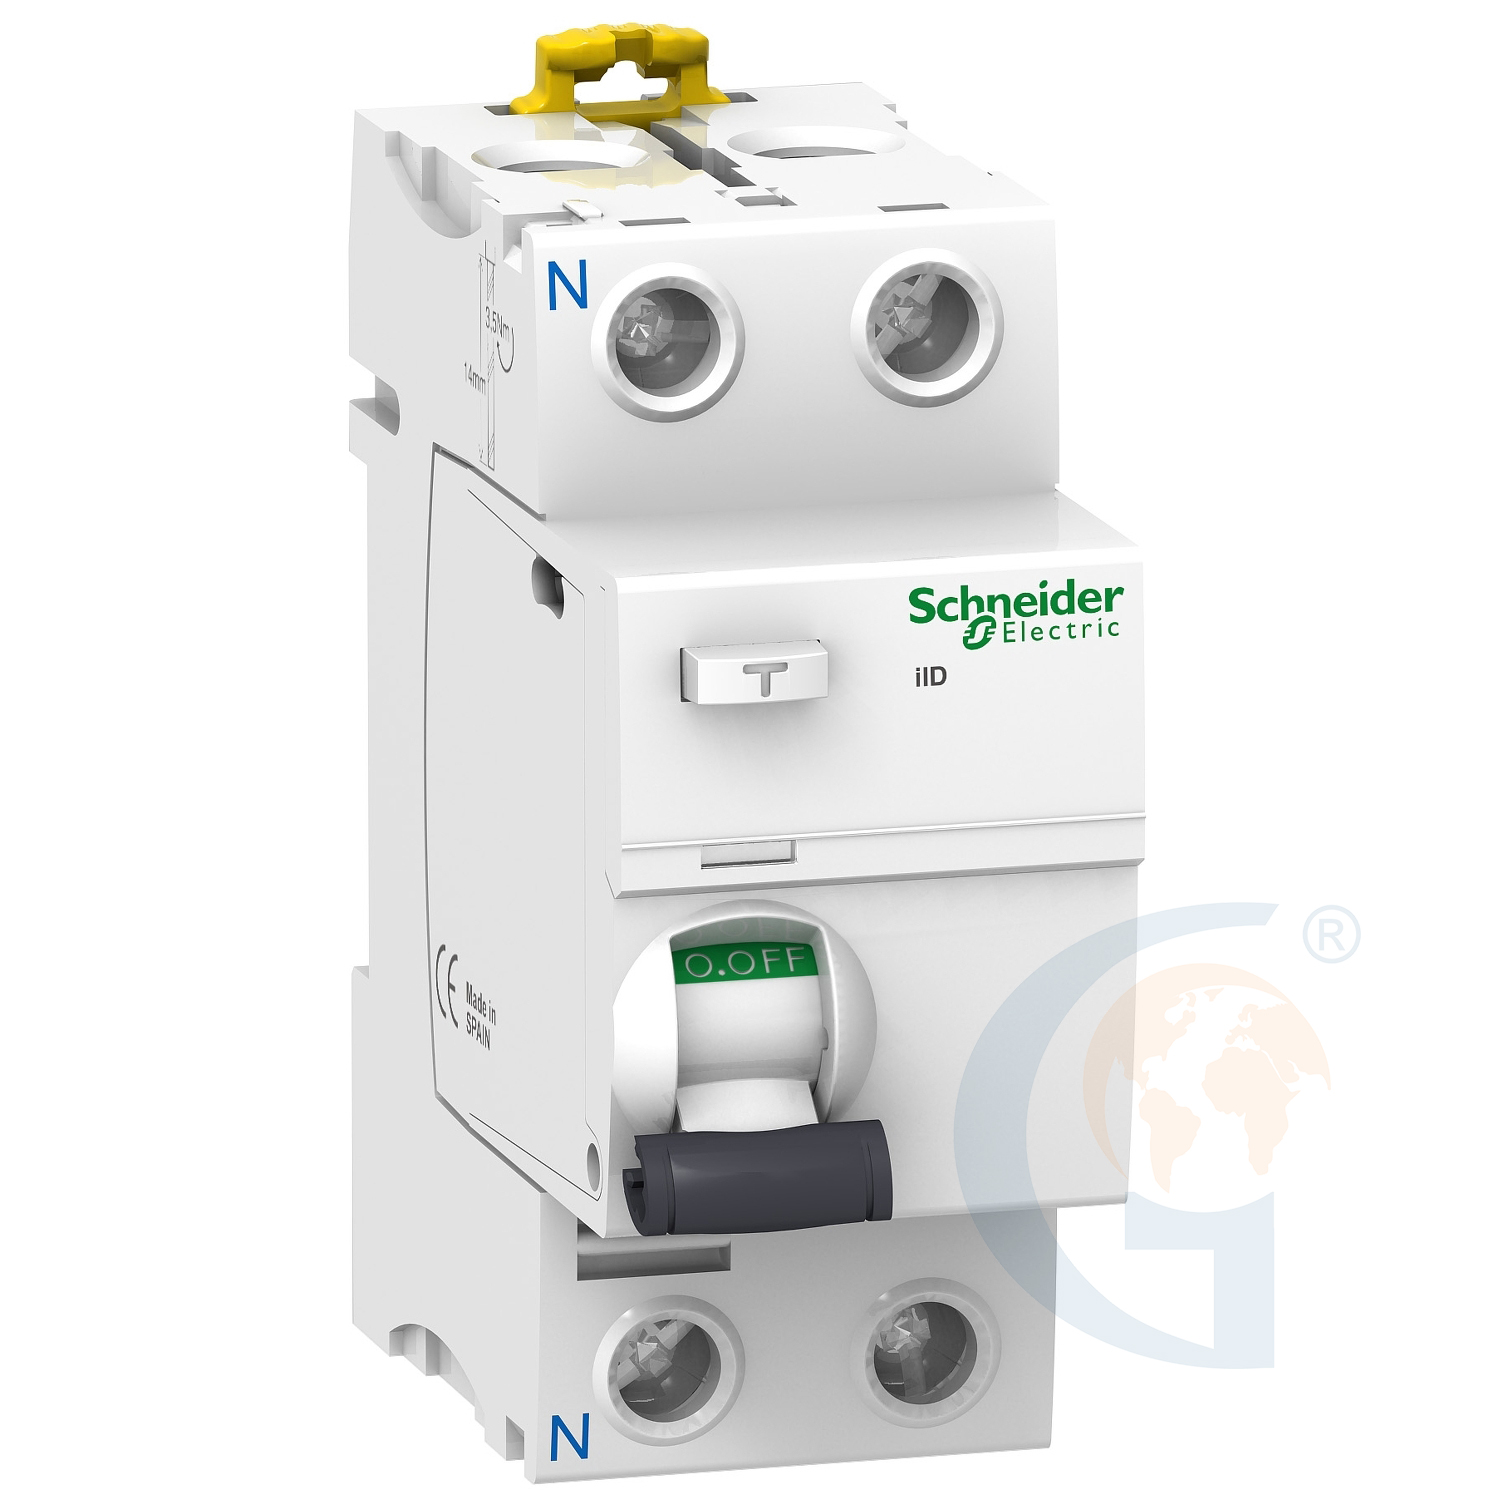 Schneider Electric A9R31240 ACTI 9 IID – RCCB – 2P – 40A – 30MA – TYPE A-SI https://gesrepair.com/wp-content/uploads/2020/Schneider/Schneider_Electric_A9R31240_.jpg